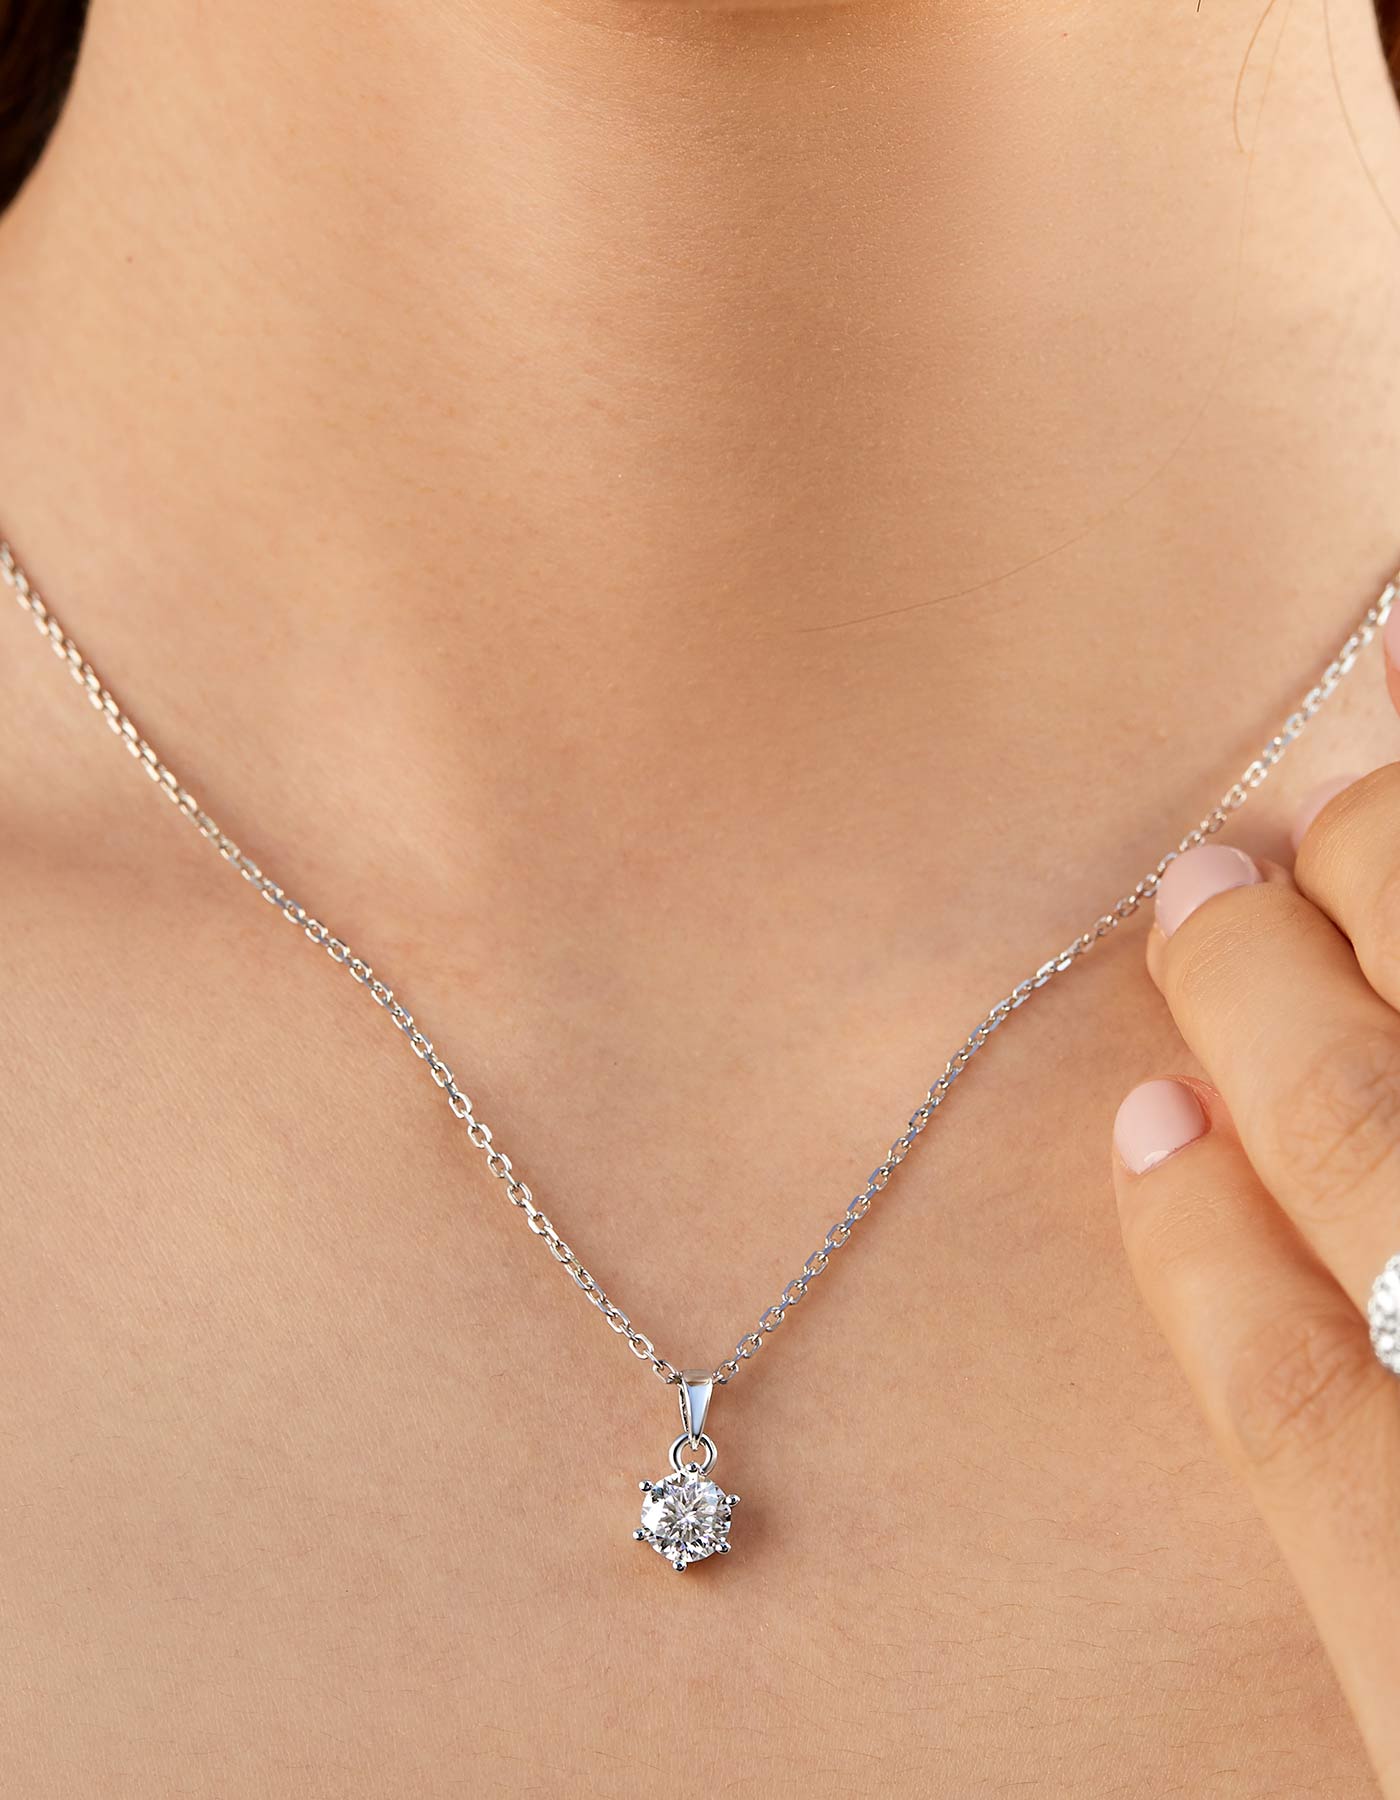 MomentWish Silver Moissanite Necklace